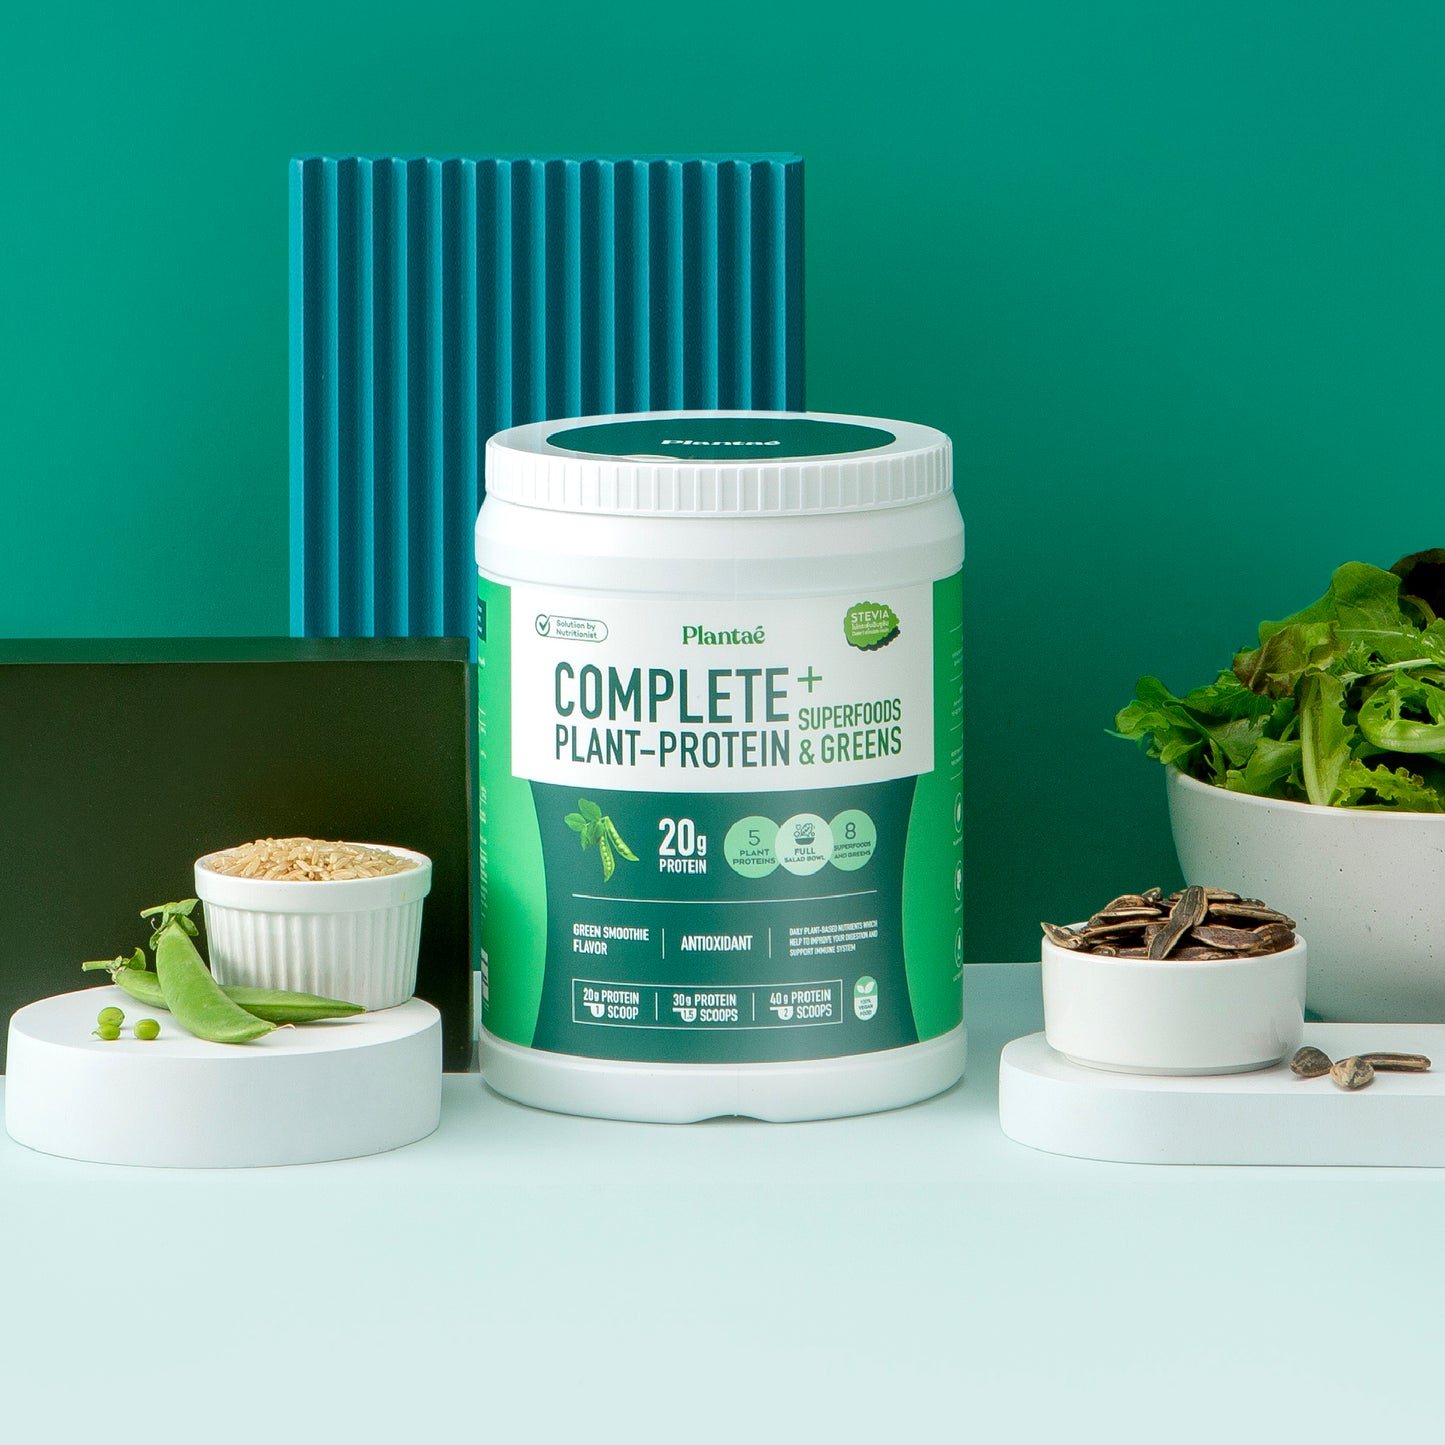 Plantae Complete Plant Protein With SuperFoods And Greens